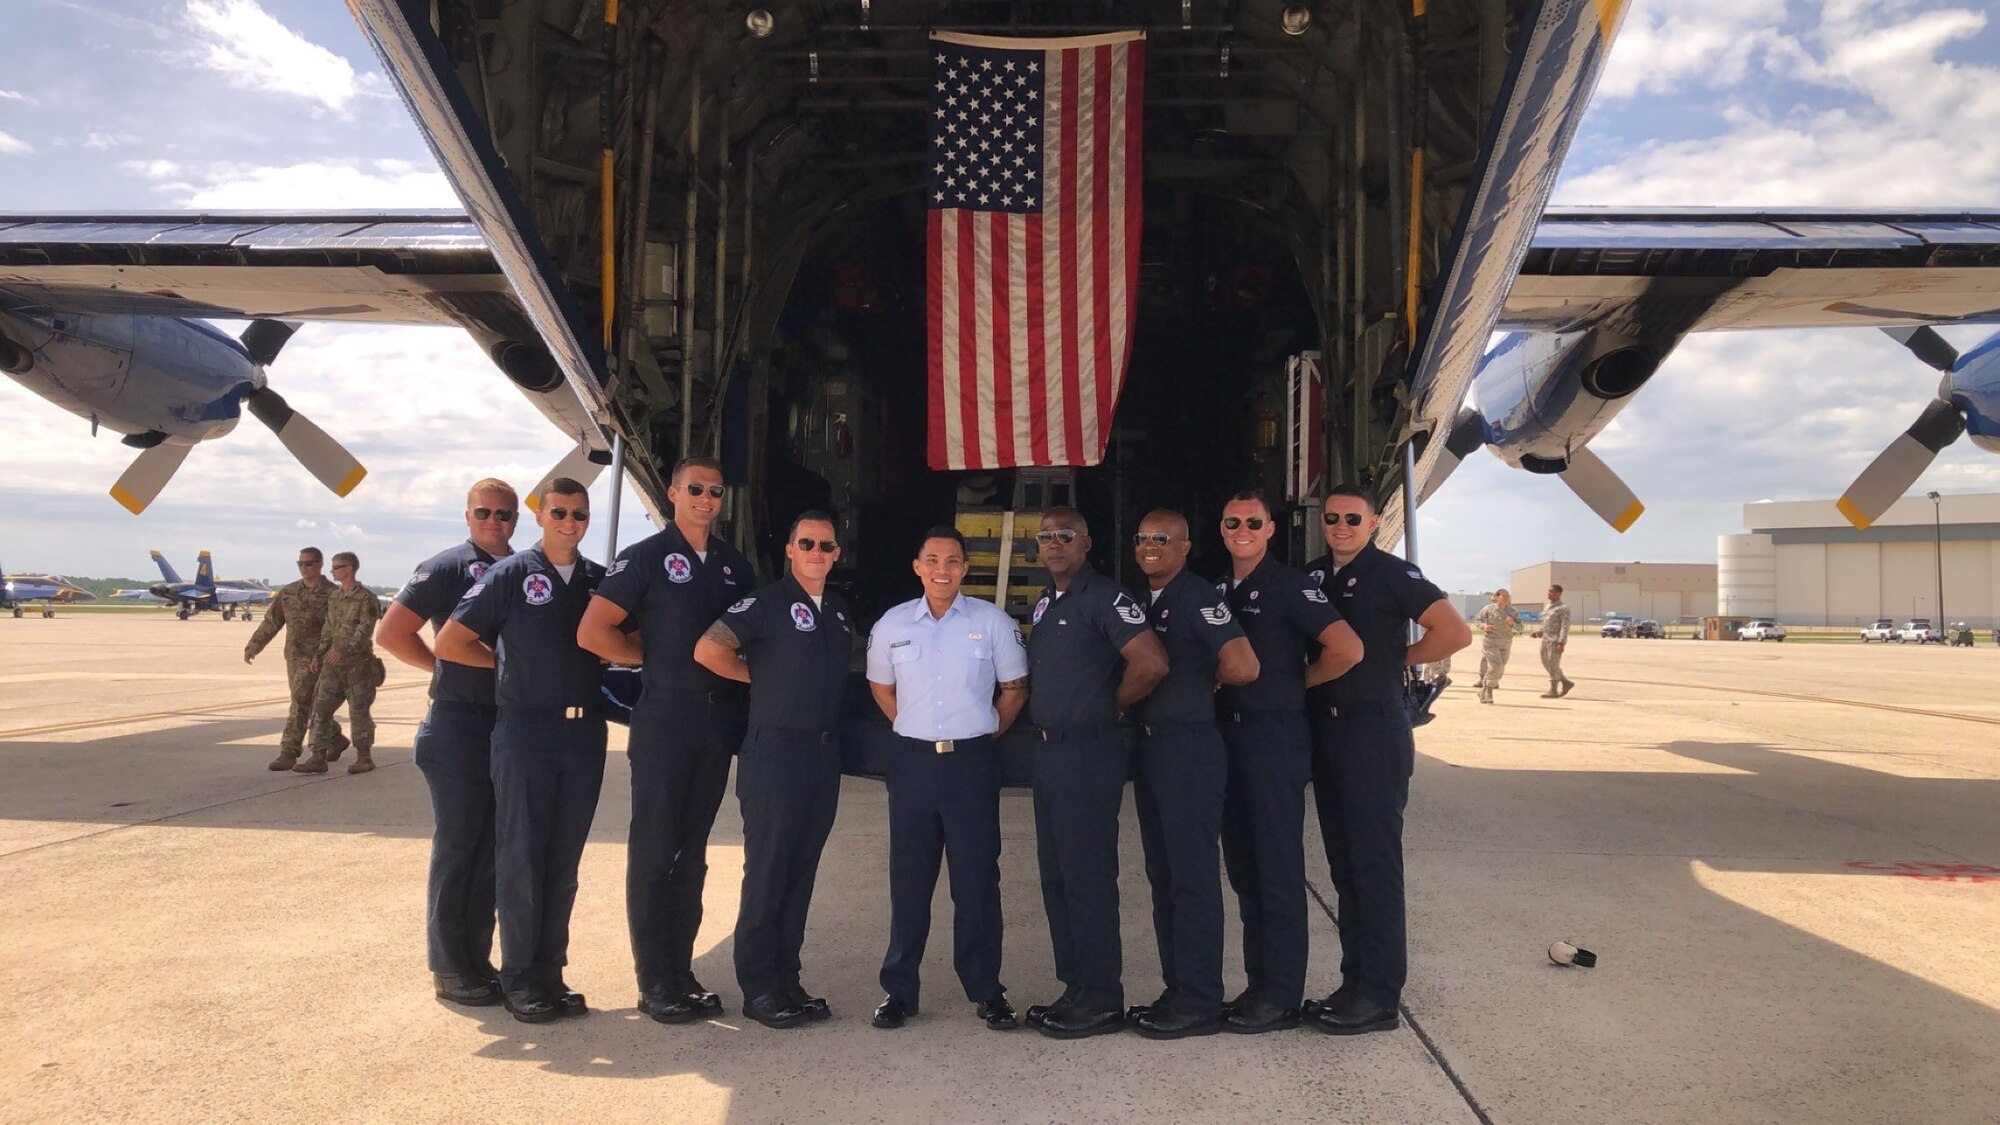 U.S. Space Force Tech Sgt. Luis Peralta poses for a photo with members of the U.S. Air Force Thunderbirds. (Courtesy photo)